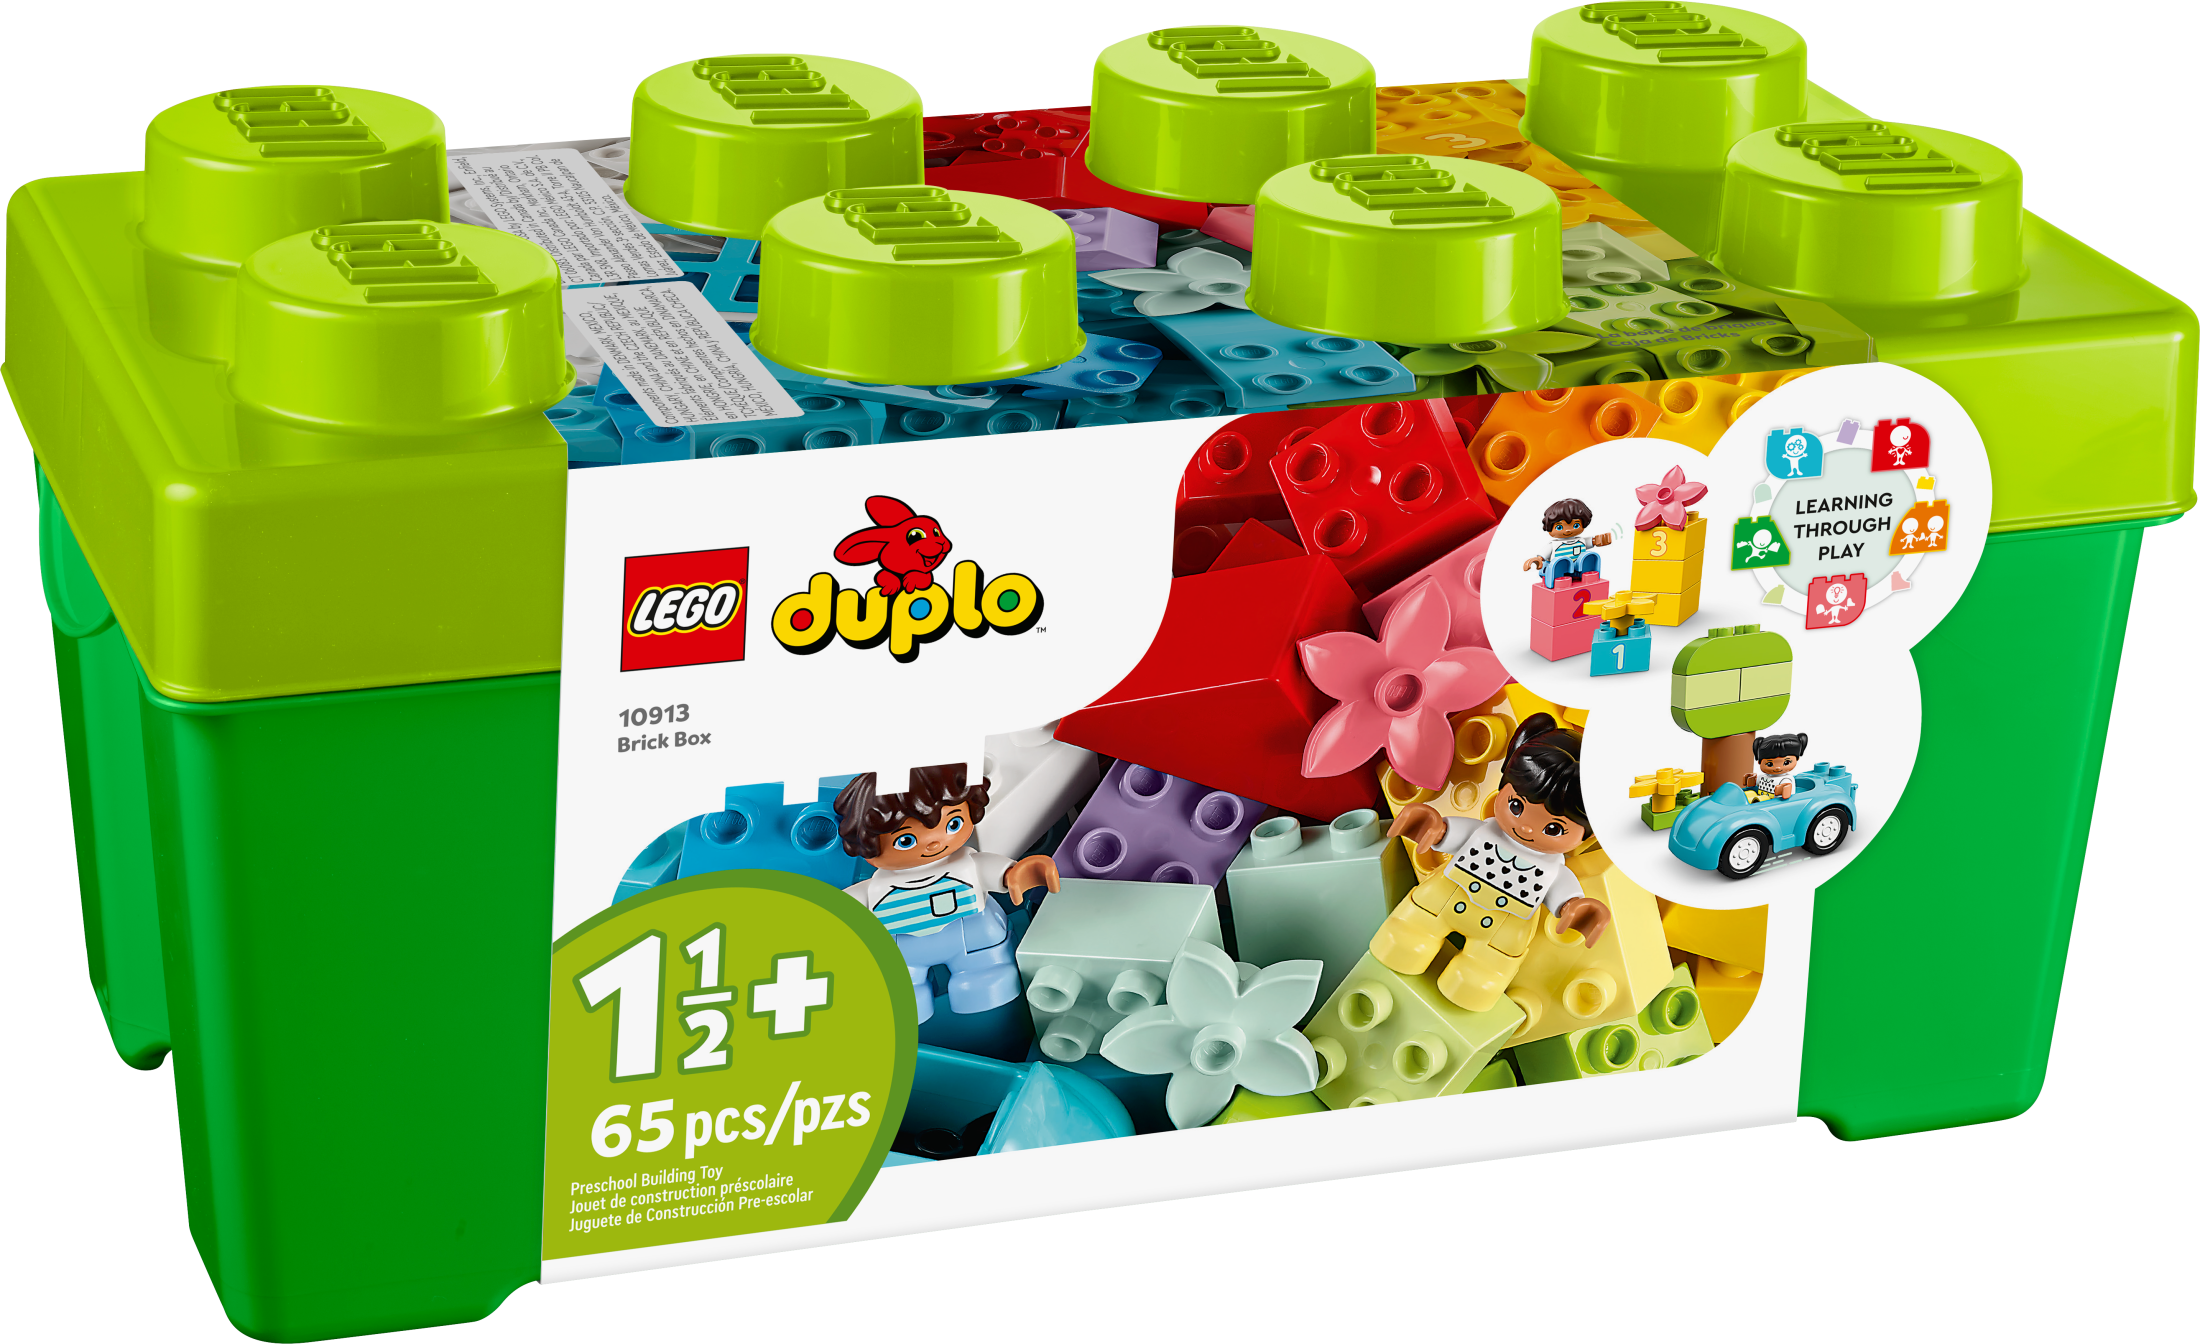 LEGO DUPLO Classic Brick Box Building Set with Storage 10913, Toy Car, Number Bricks and More, Learning Toys for Toddlers, Boys & Girls 18 Months Old - image 3 of 8